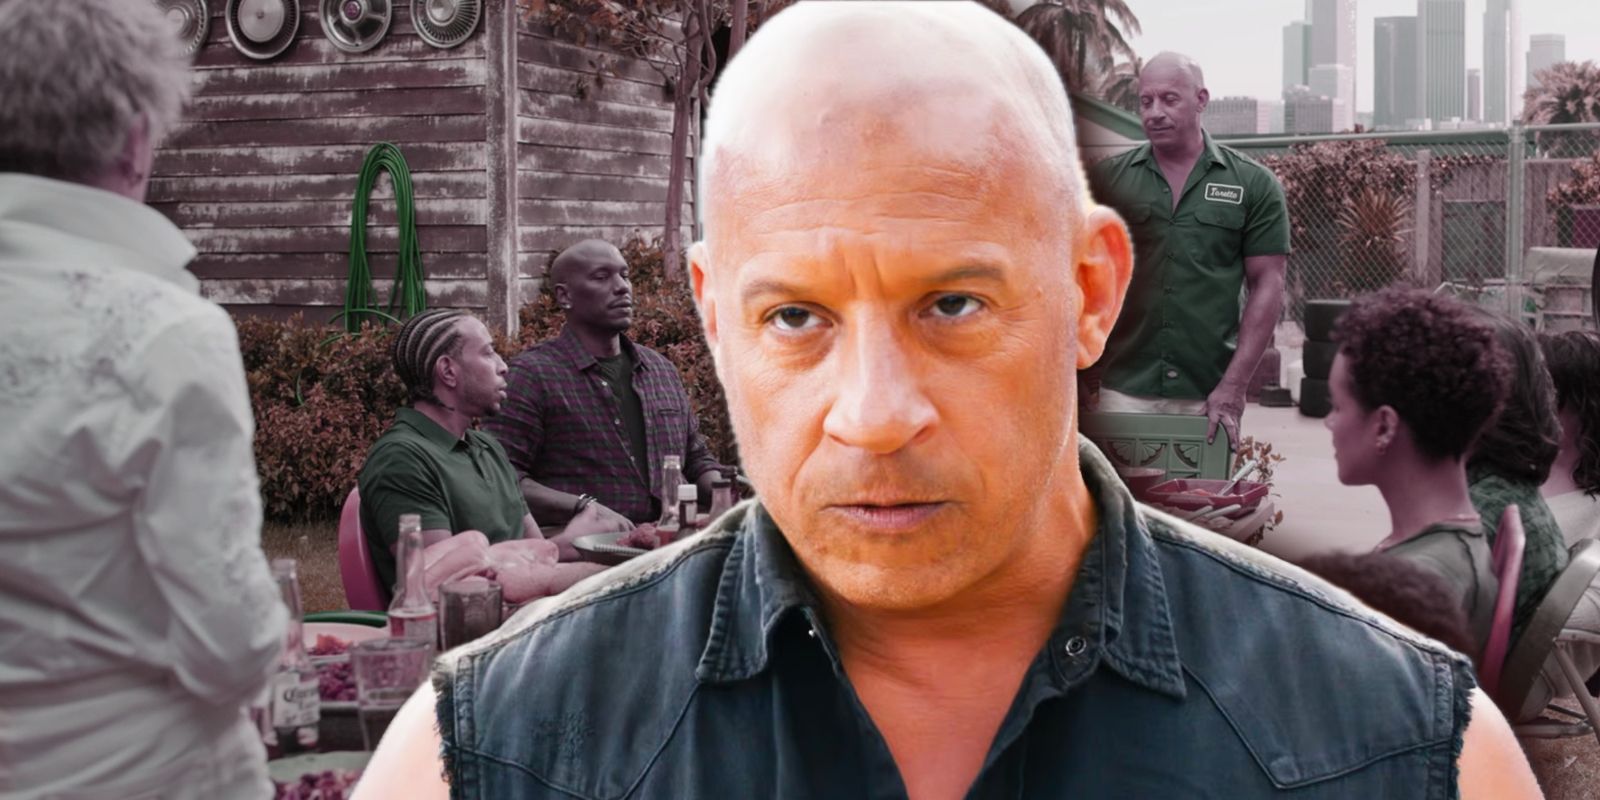 Dominic Toretto overtop Fast X scene of cast eating at table